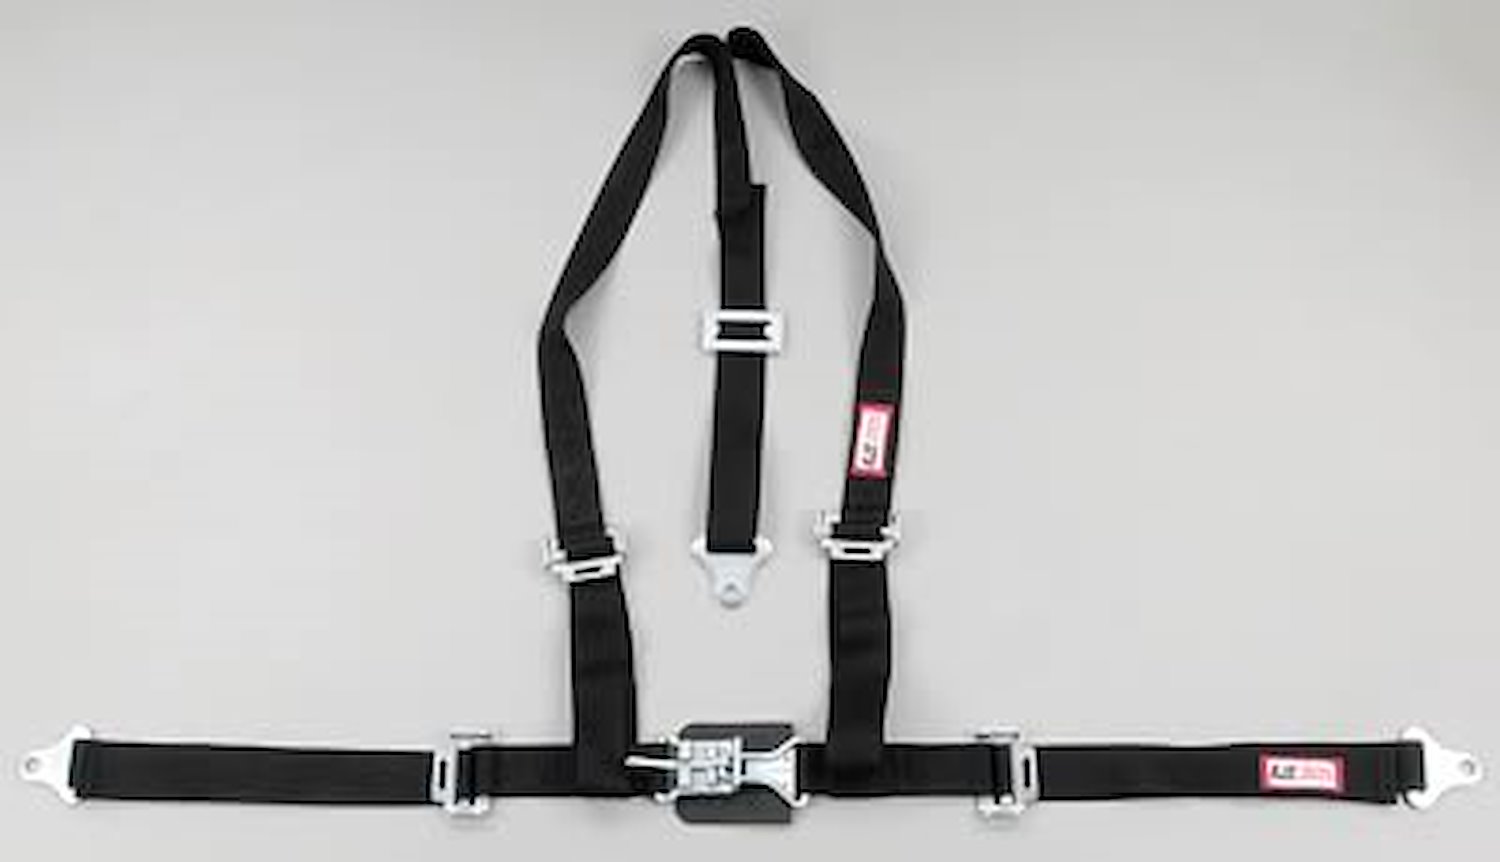 NON-SFI L&L HARNESS 2 PULL DOWN Lap Belt SEWN IN 2 S.H. V ROLL BAR Mount ALL SNAP ENDS GRAY